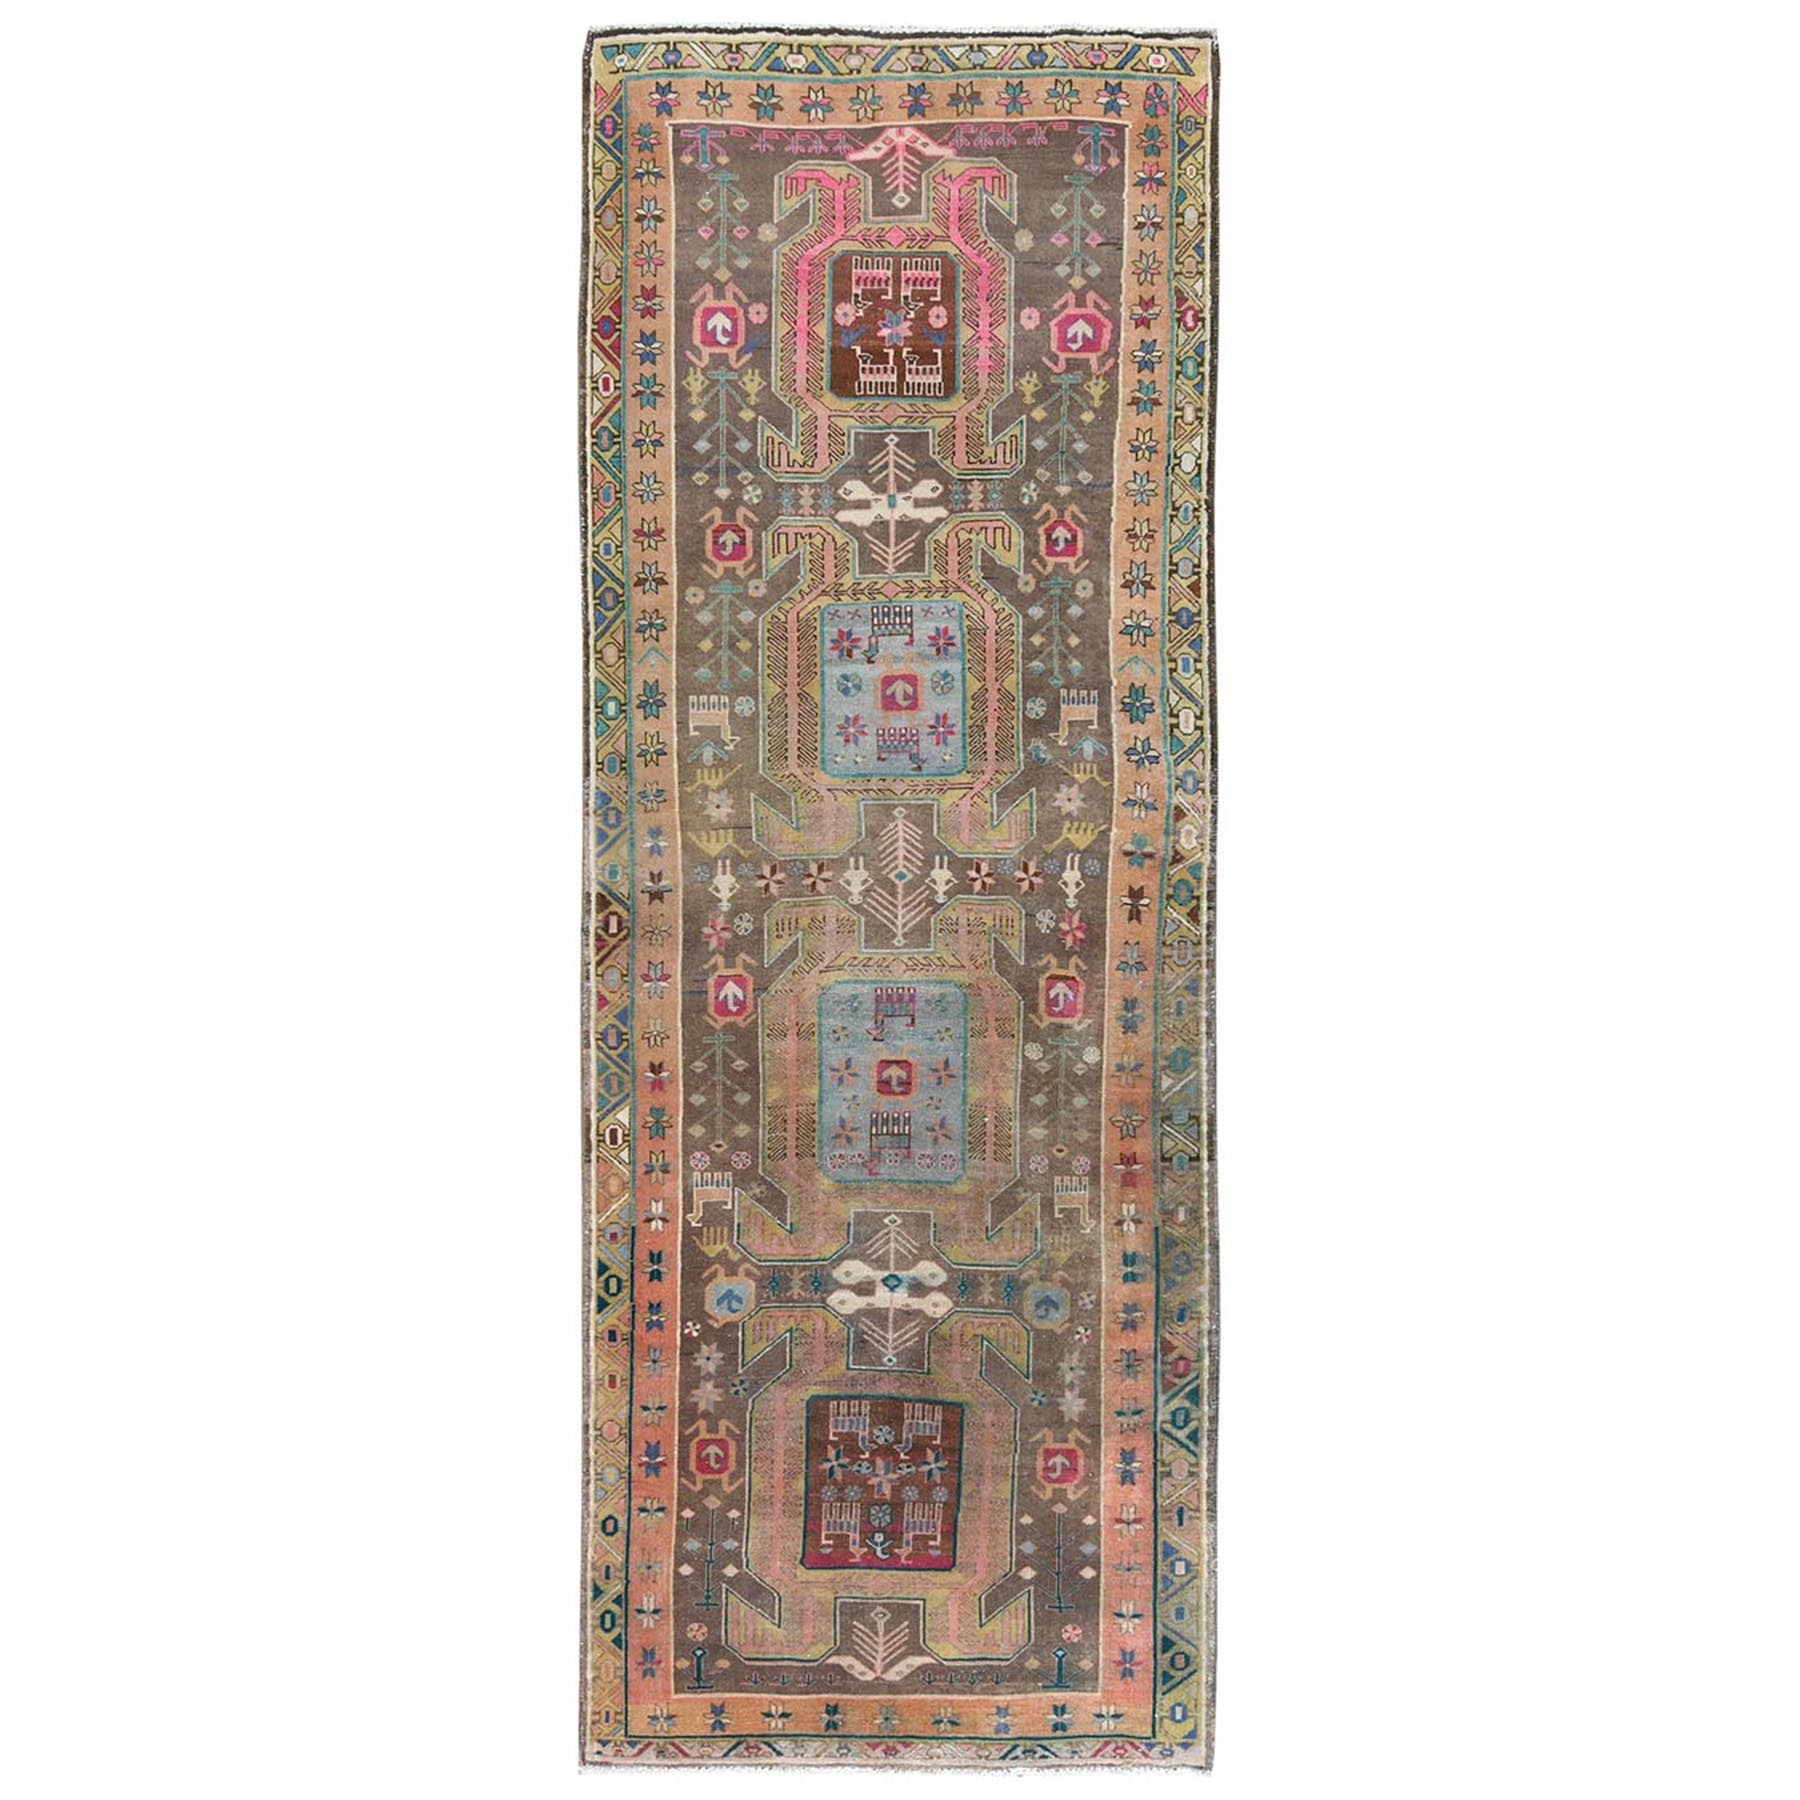 4'x10'8" Almond Brown, Vintage Northwest Persian with Large Elements Medallions, Small Animal and Human Figurines, Clean, Worn Down, Pure Wool Hand Woven Wide Runner Oriental Rug 